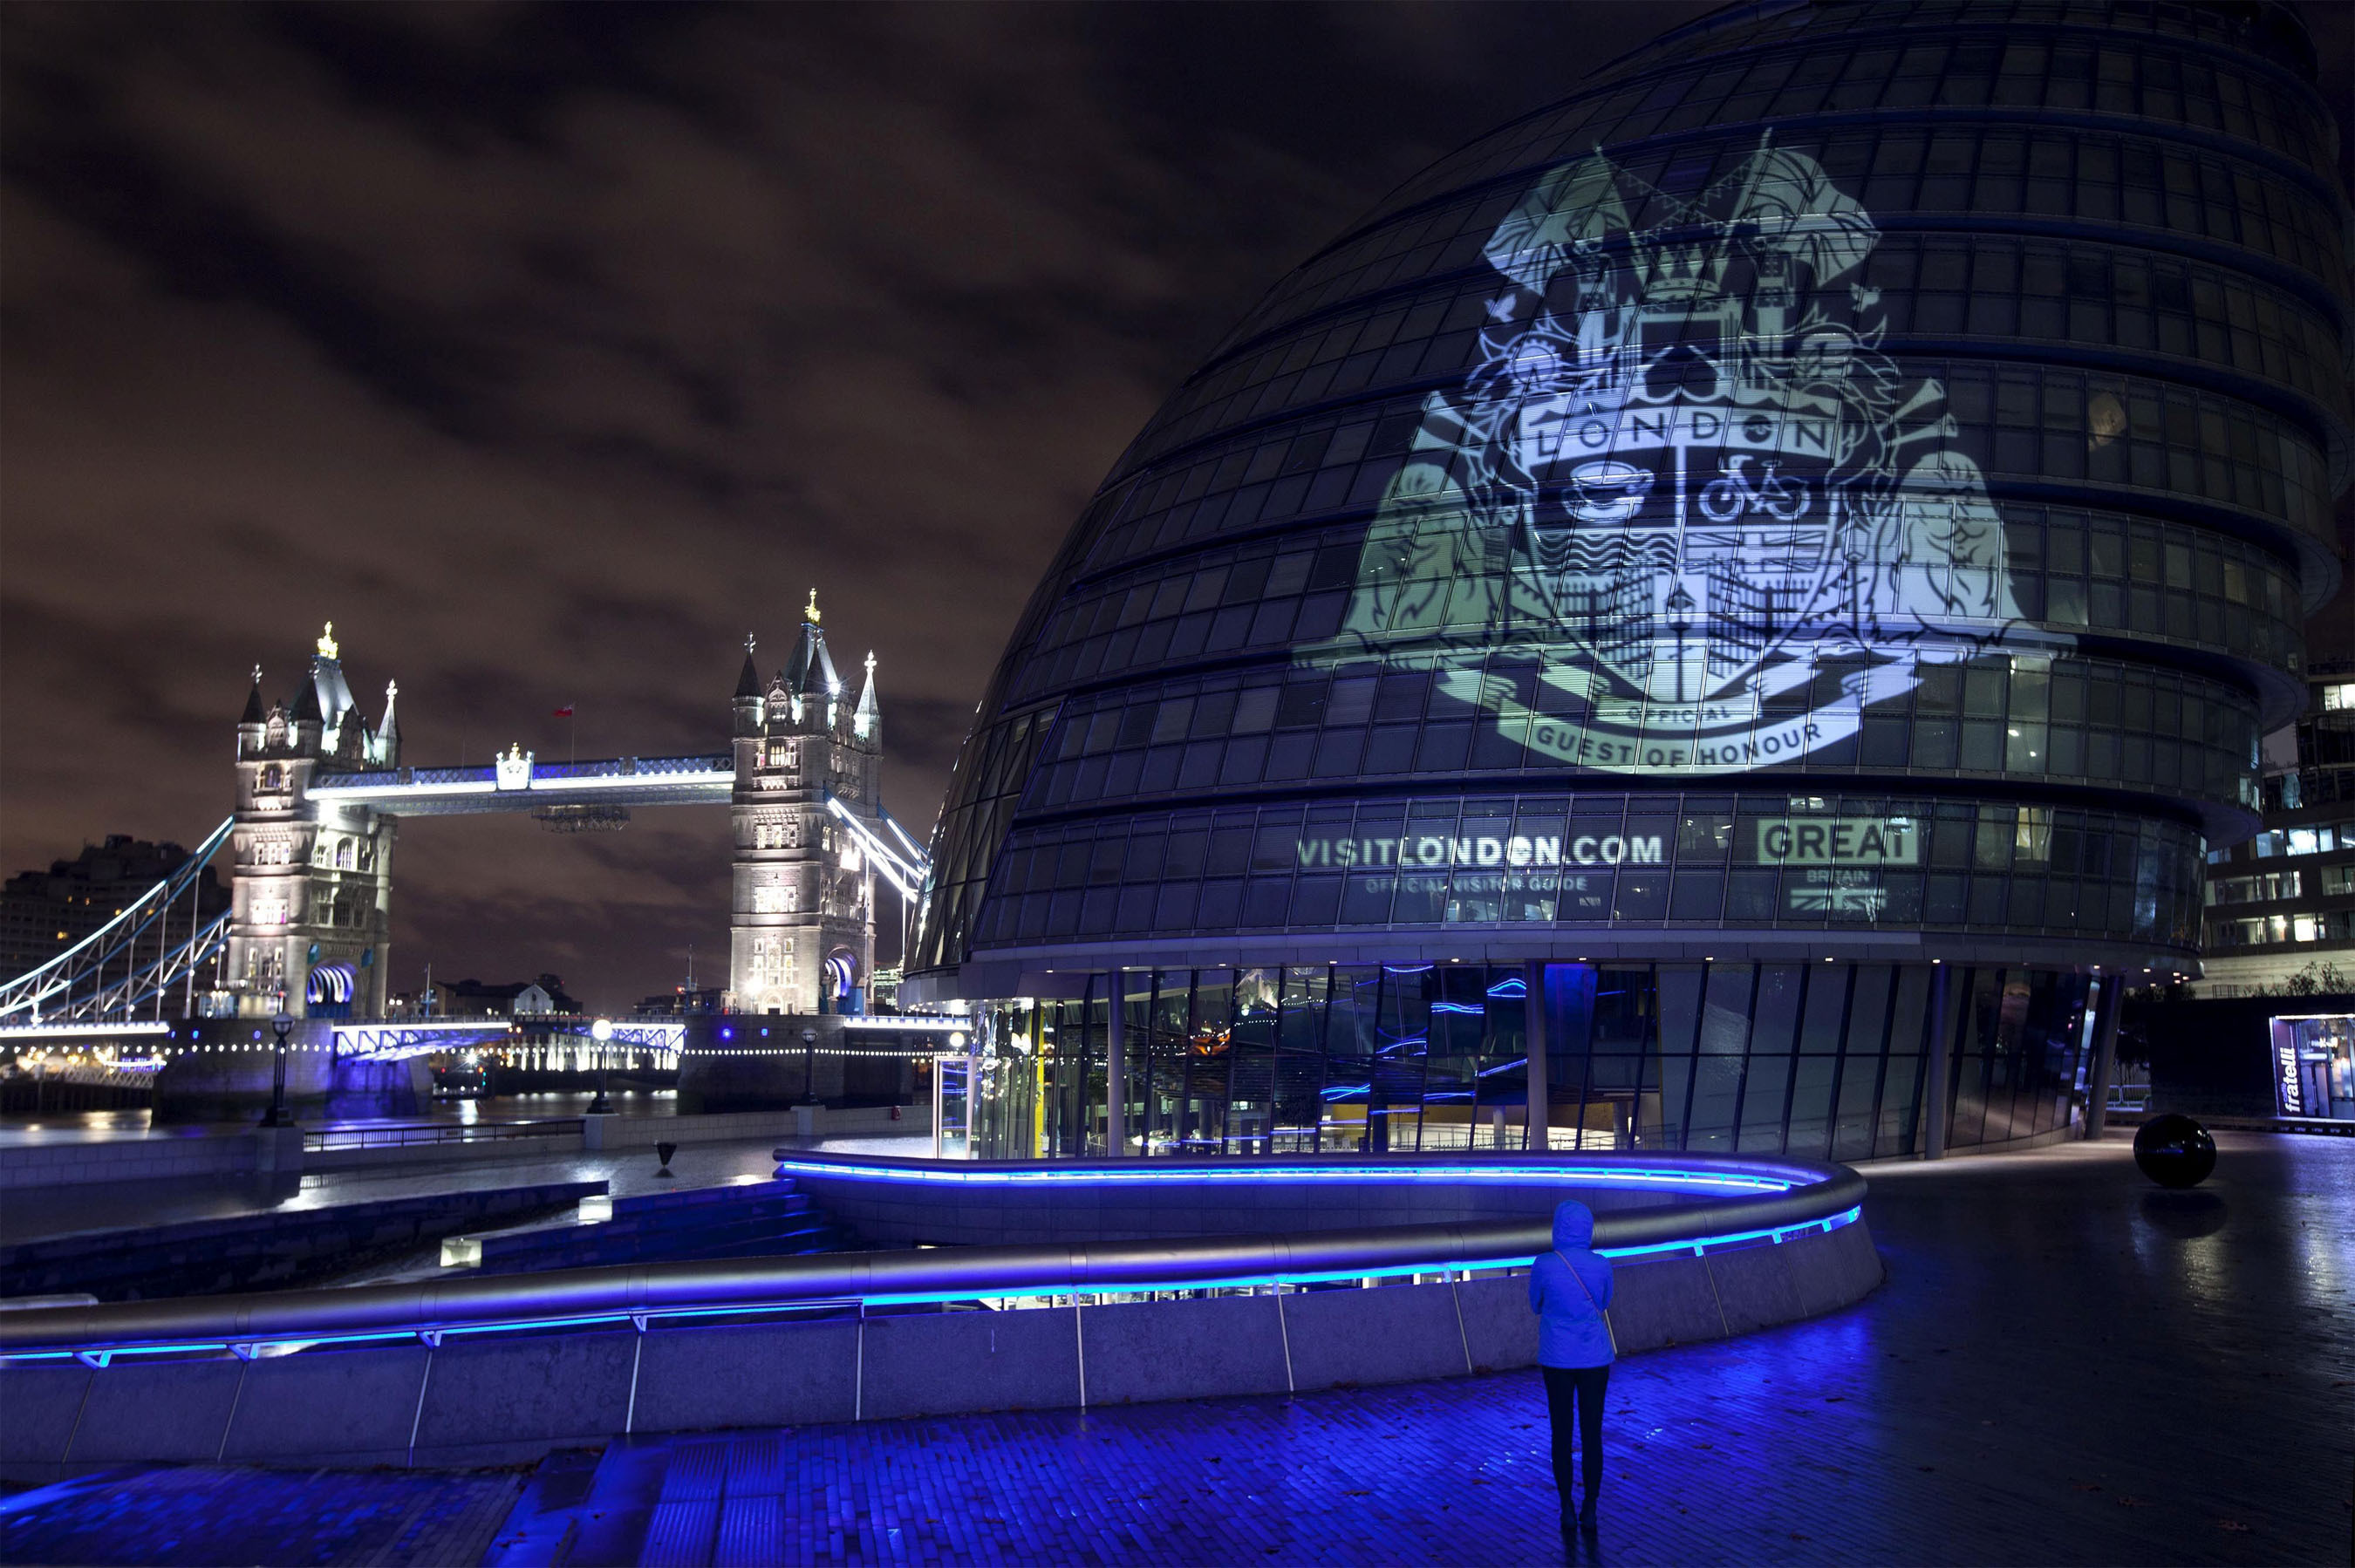 A crest was projected onto City Hall in central London today, Wednesday 12 November 2014, to mark the launch of visitlondon.com's new international search to find London's Official Guest of Honour. The winning guest will be invited to London in February 2015 and will have the unique honour of opening Tower Bridge, seeing a West End musical with Jessie J and visiting the Science Museum with renowned physicist Professor Stephen Hawking as well as many other experiences. Credit: David Parry/PAWire. (PRNewsFoto/www.visitlondon.com) (PRNewsFoto/WWW_VISITLONDON_COM)